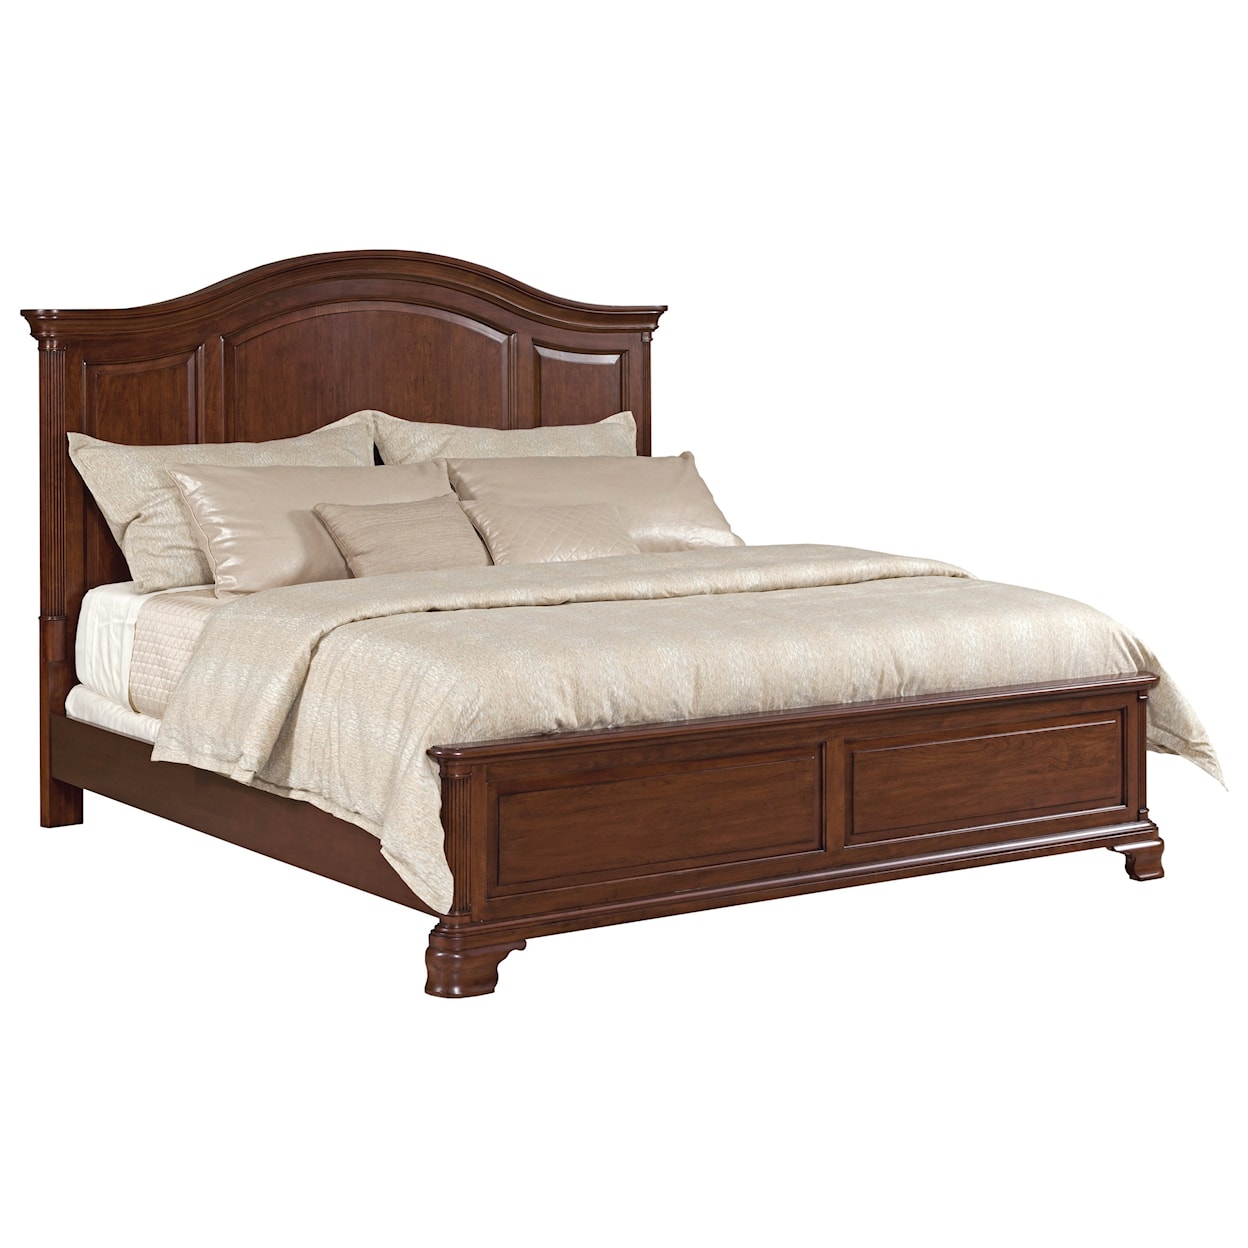 Kincaid Furniture Hadleigh Arched Panel Bed King Package